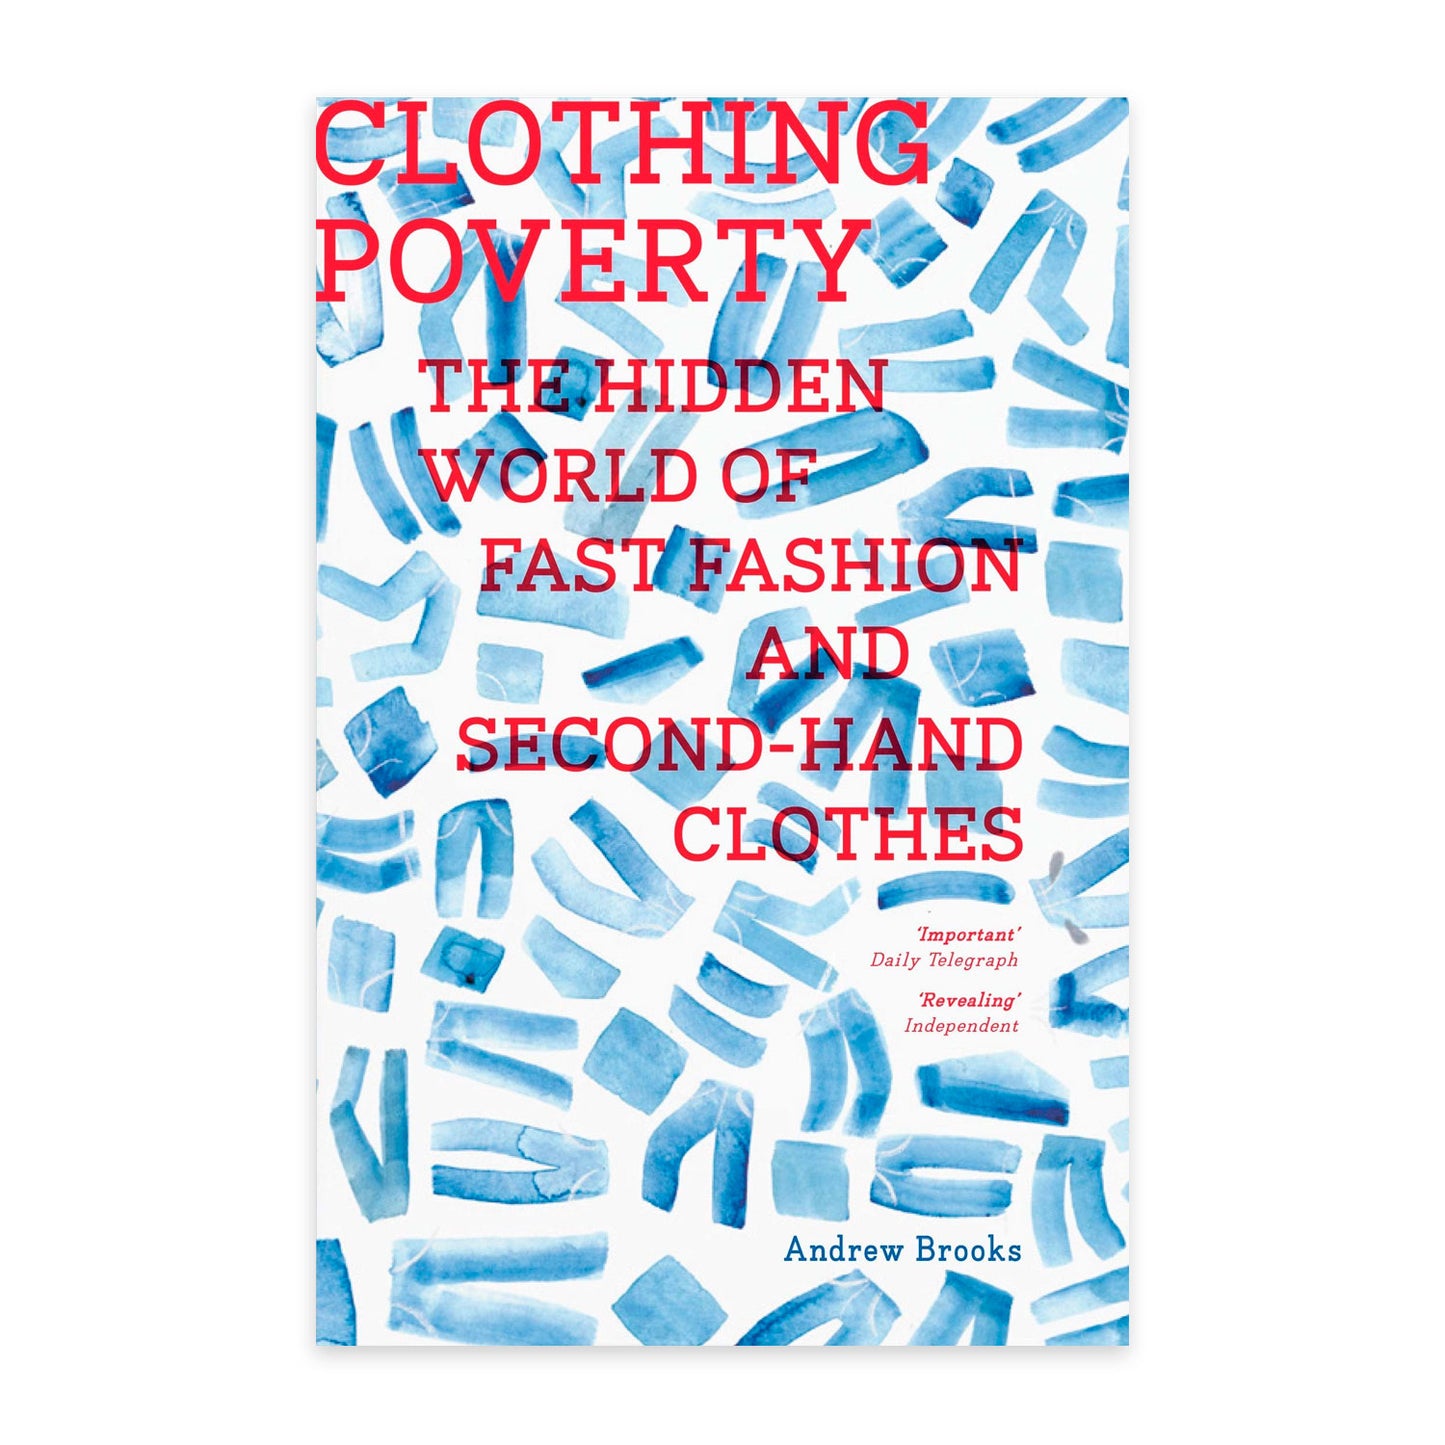 Clothing Poverty - The Hidden World of Fast Fashion